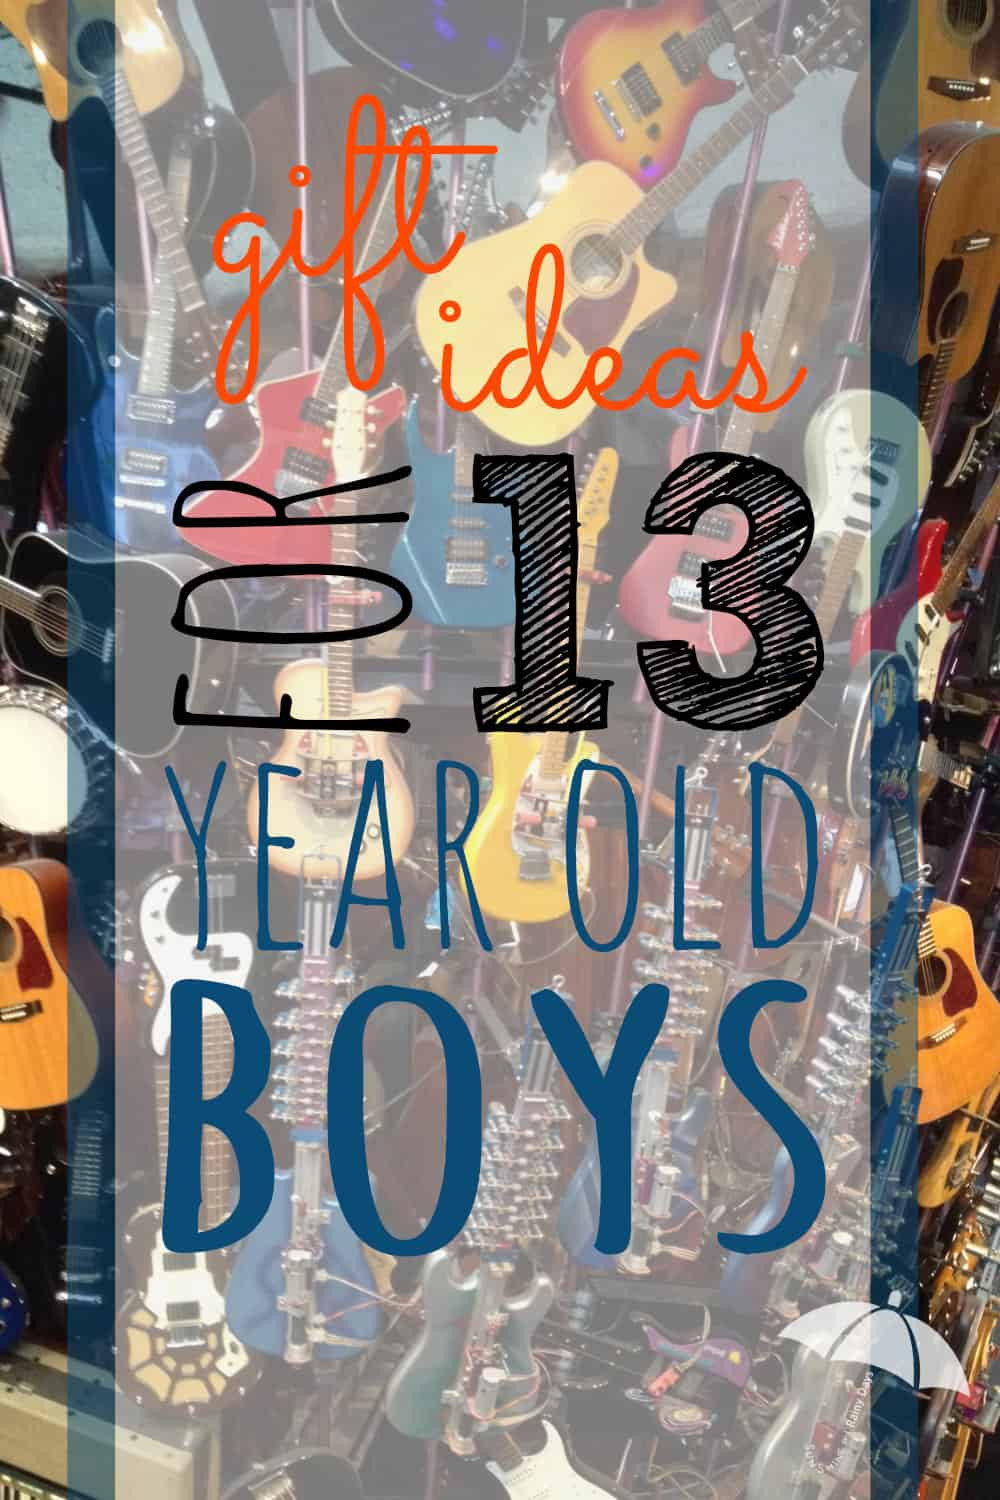 Gift Ideas 13 Year Old Boys
 Gift Ideas for 13 Year Old Boys Sunshine and Rainy Days